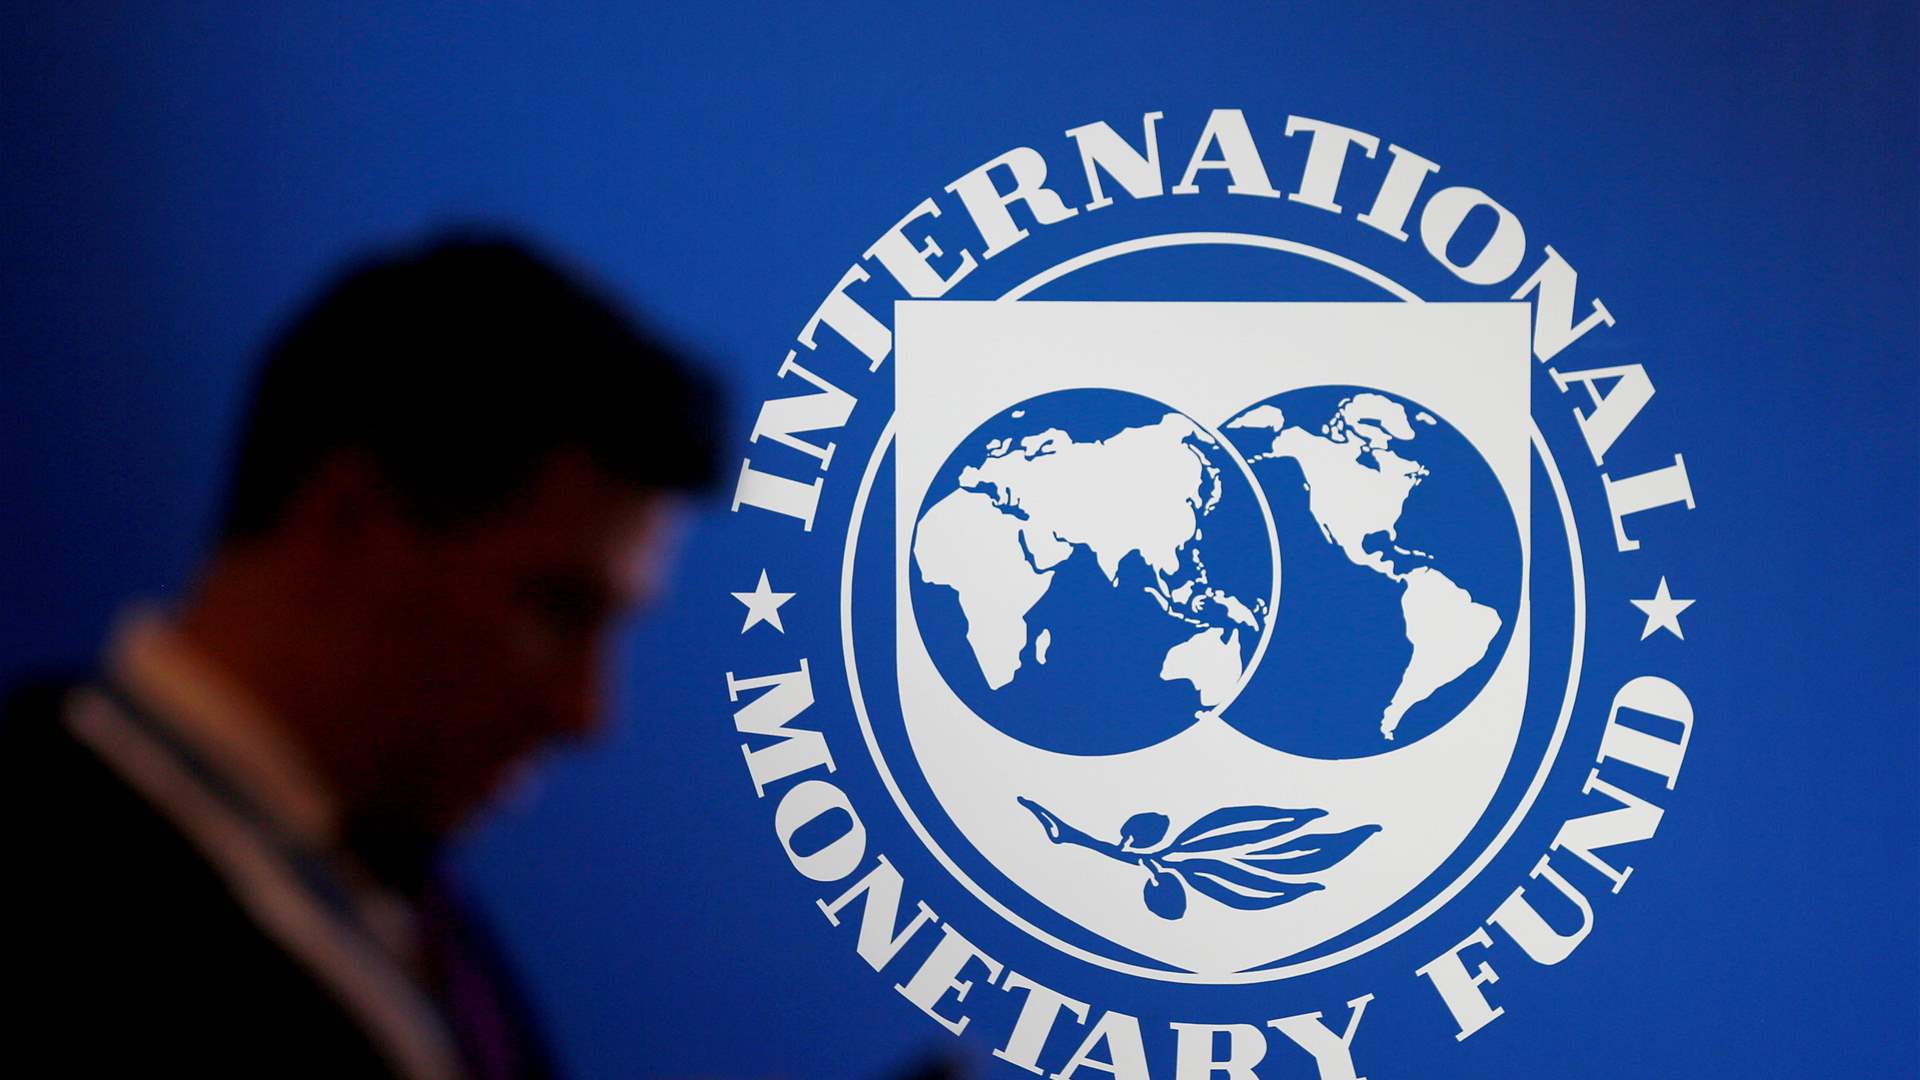 Small depositors bear the brunt: IMF urges reforms amidst rising losses